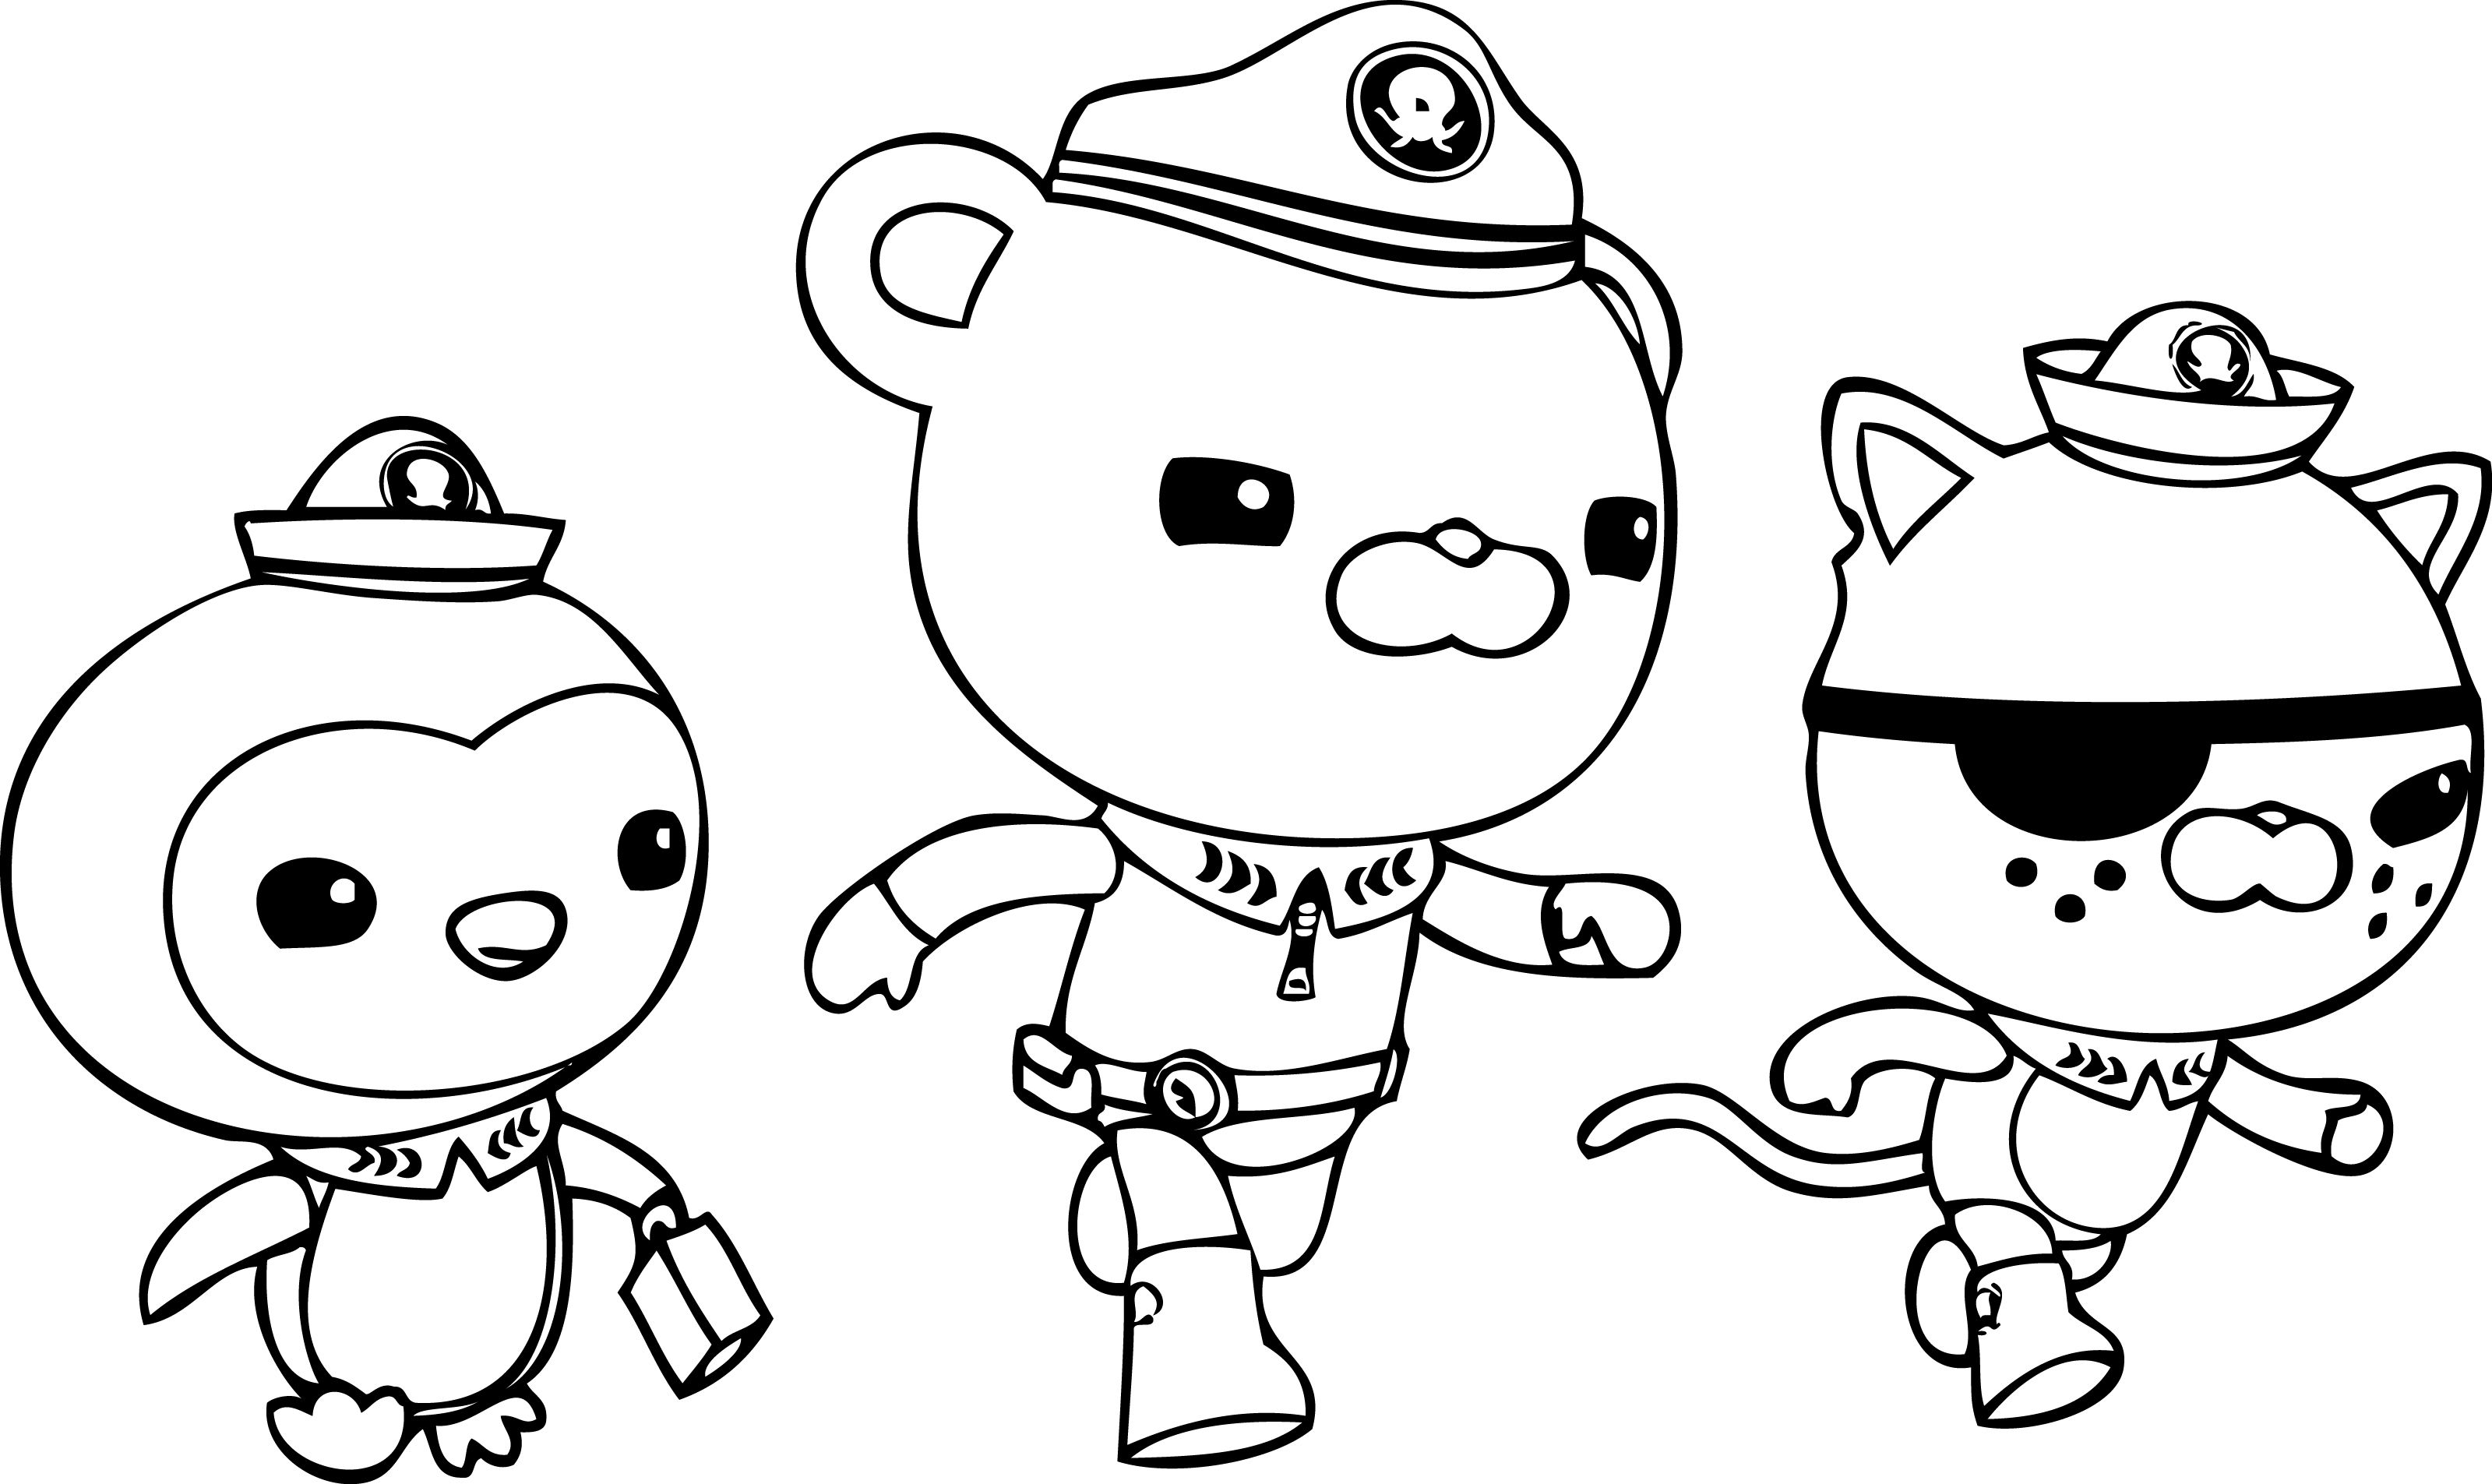 Octonauts Coloring Pages Best Coloring Pages For Kids